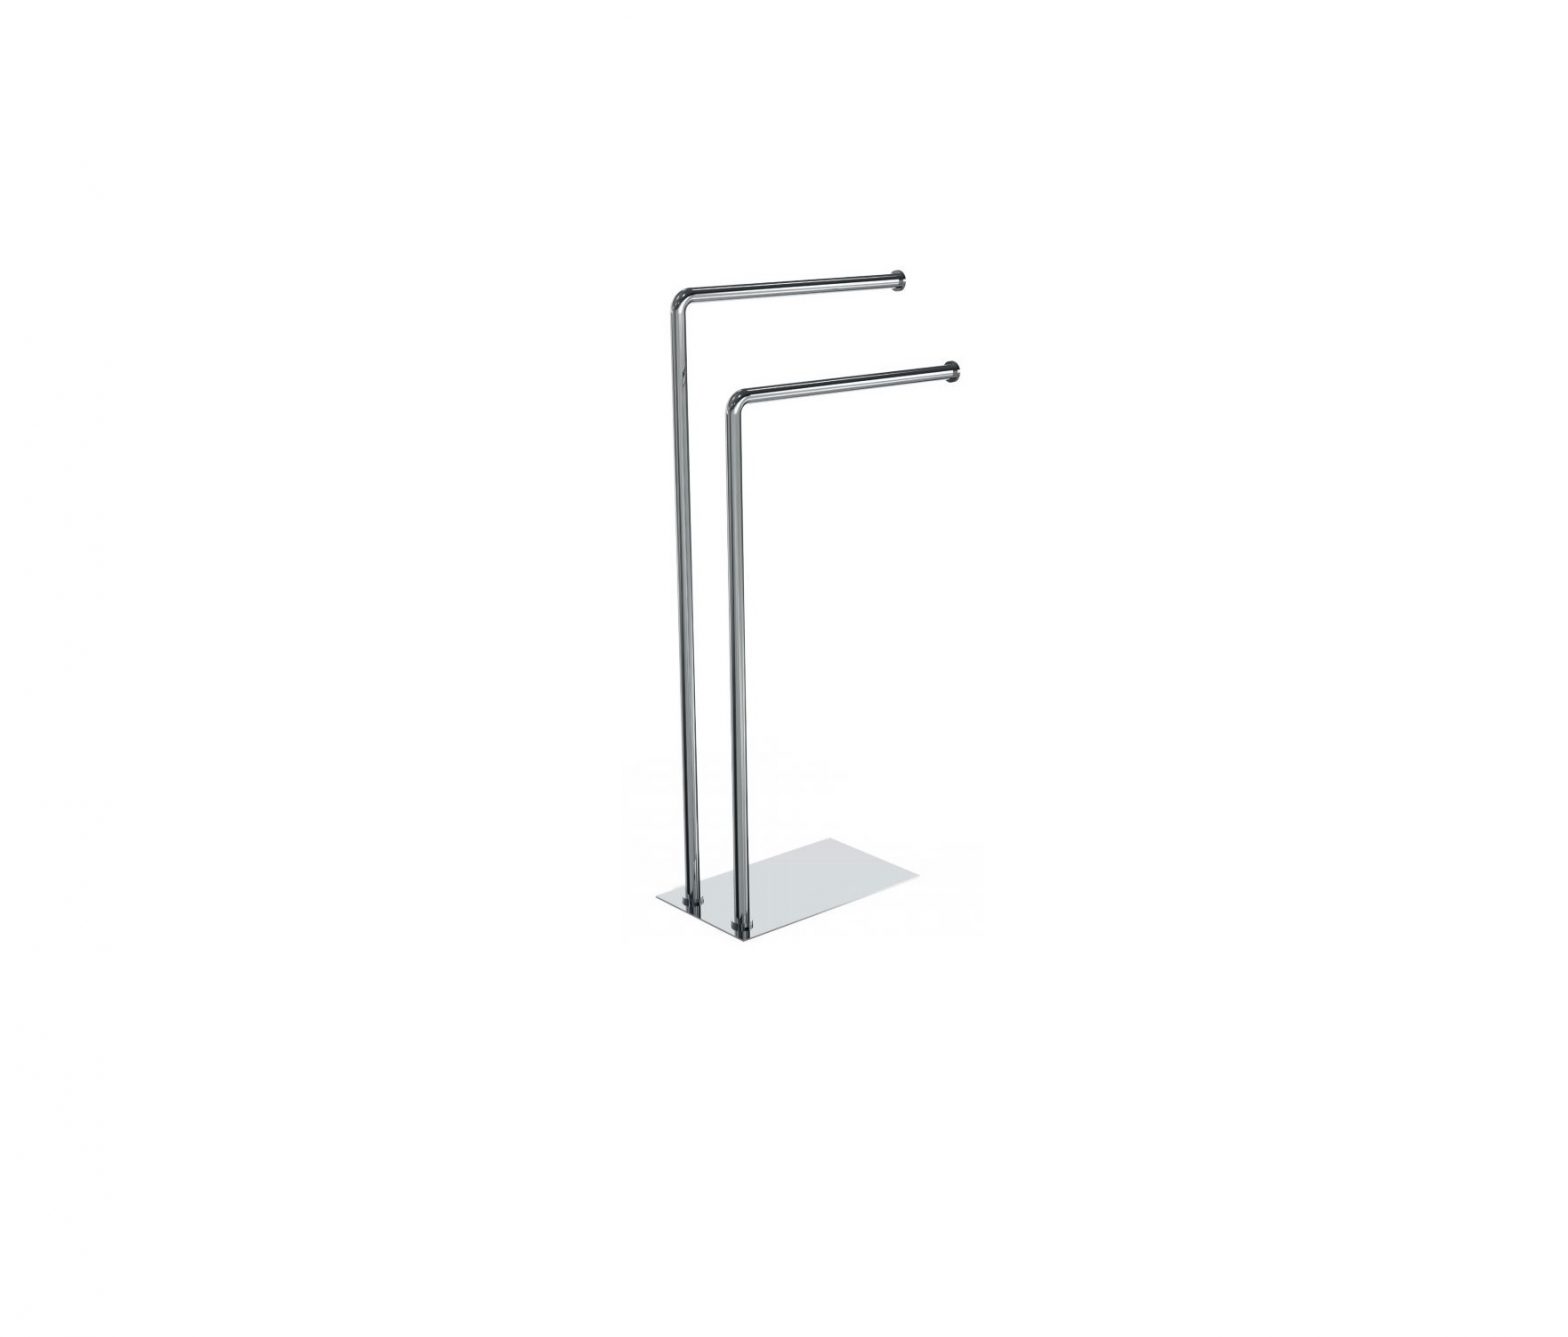 JOHN LEWIS LUX 2 Tier Towel Stand User Guide